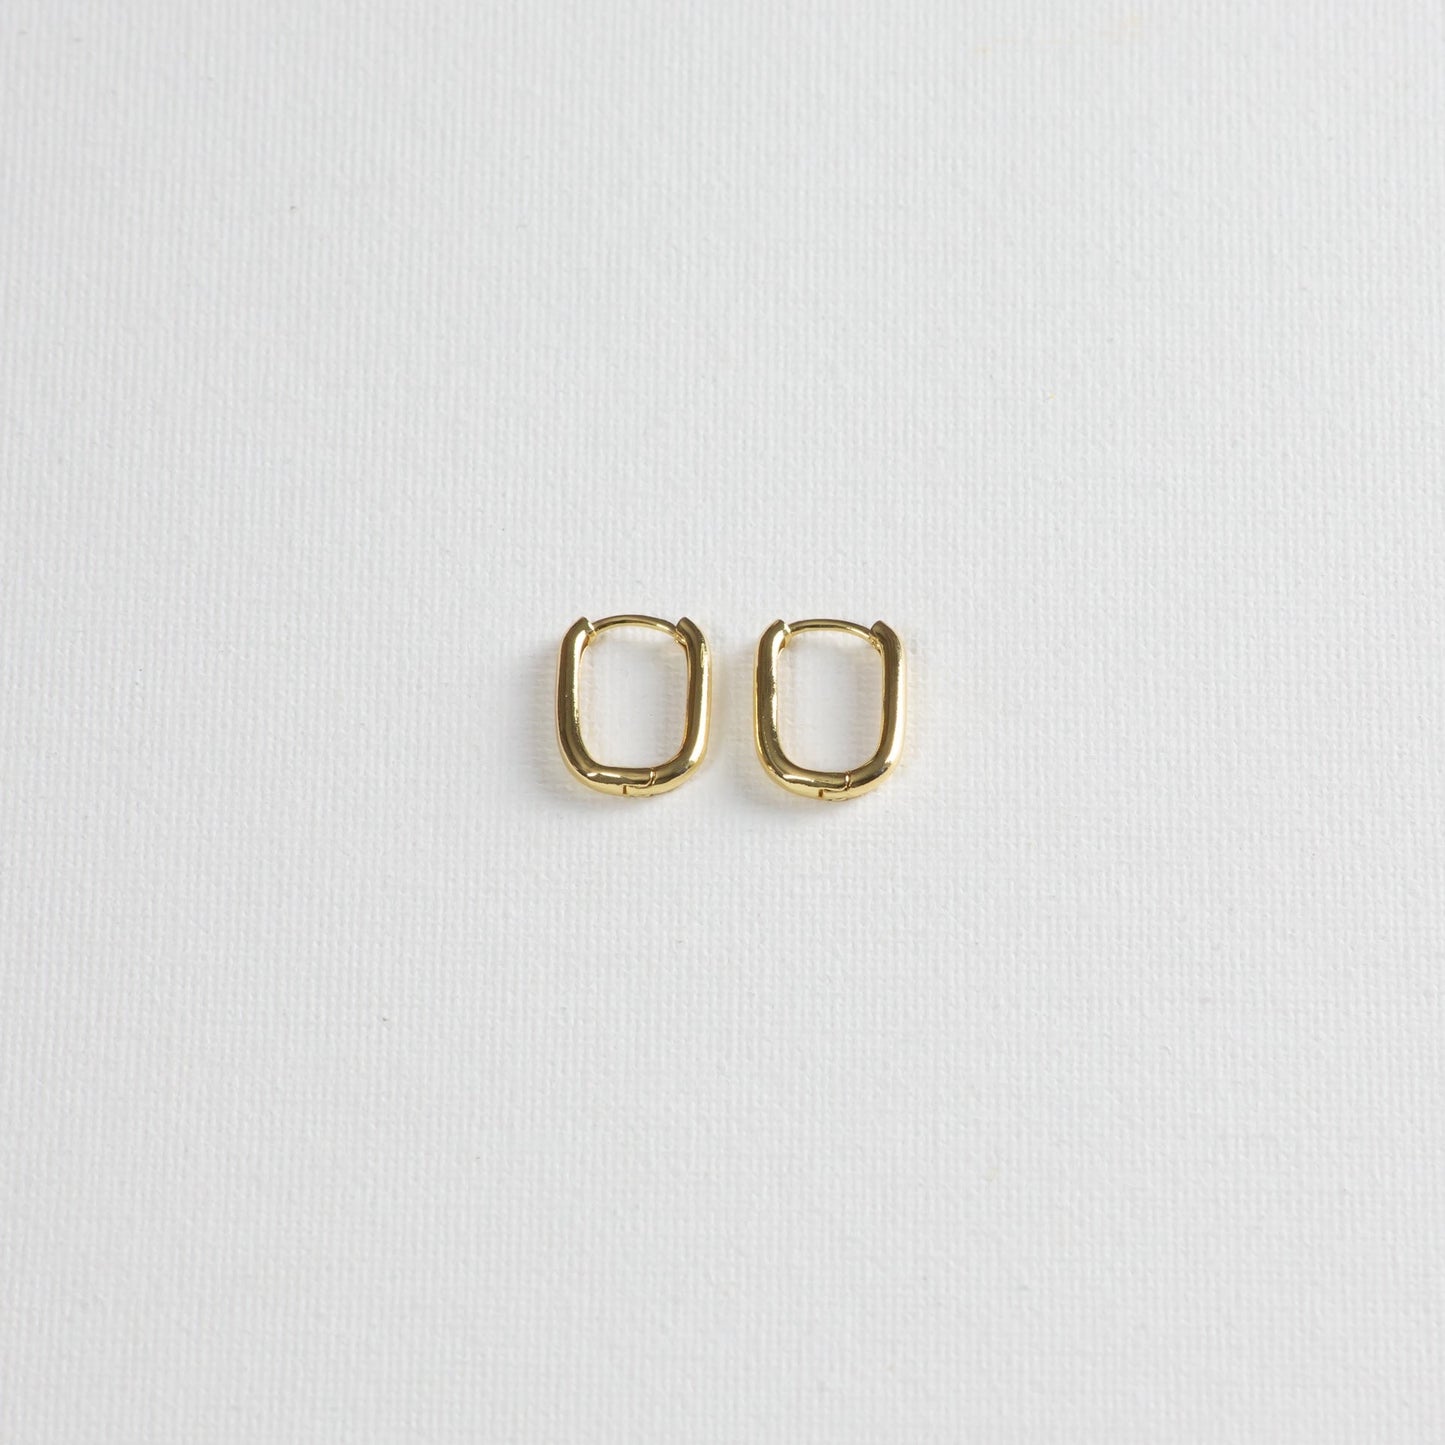 Asa hoops, gold hoops with rounded rectangle shape, on a white background.